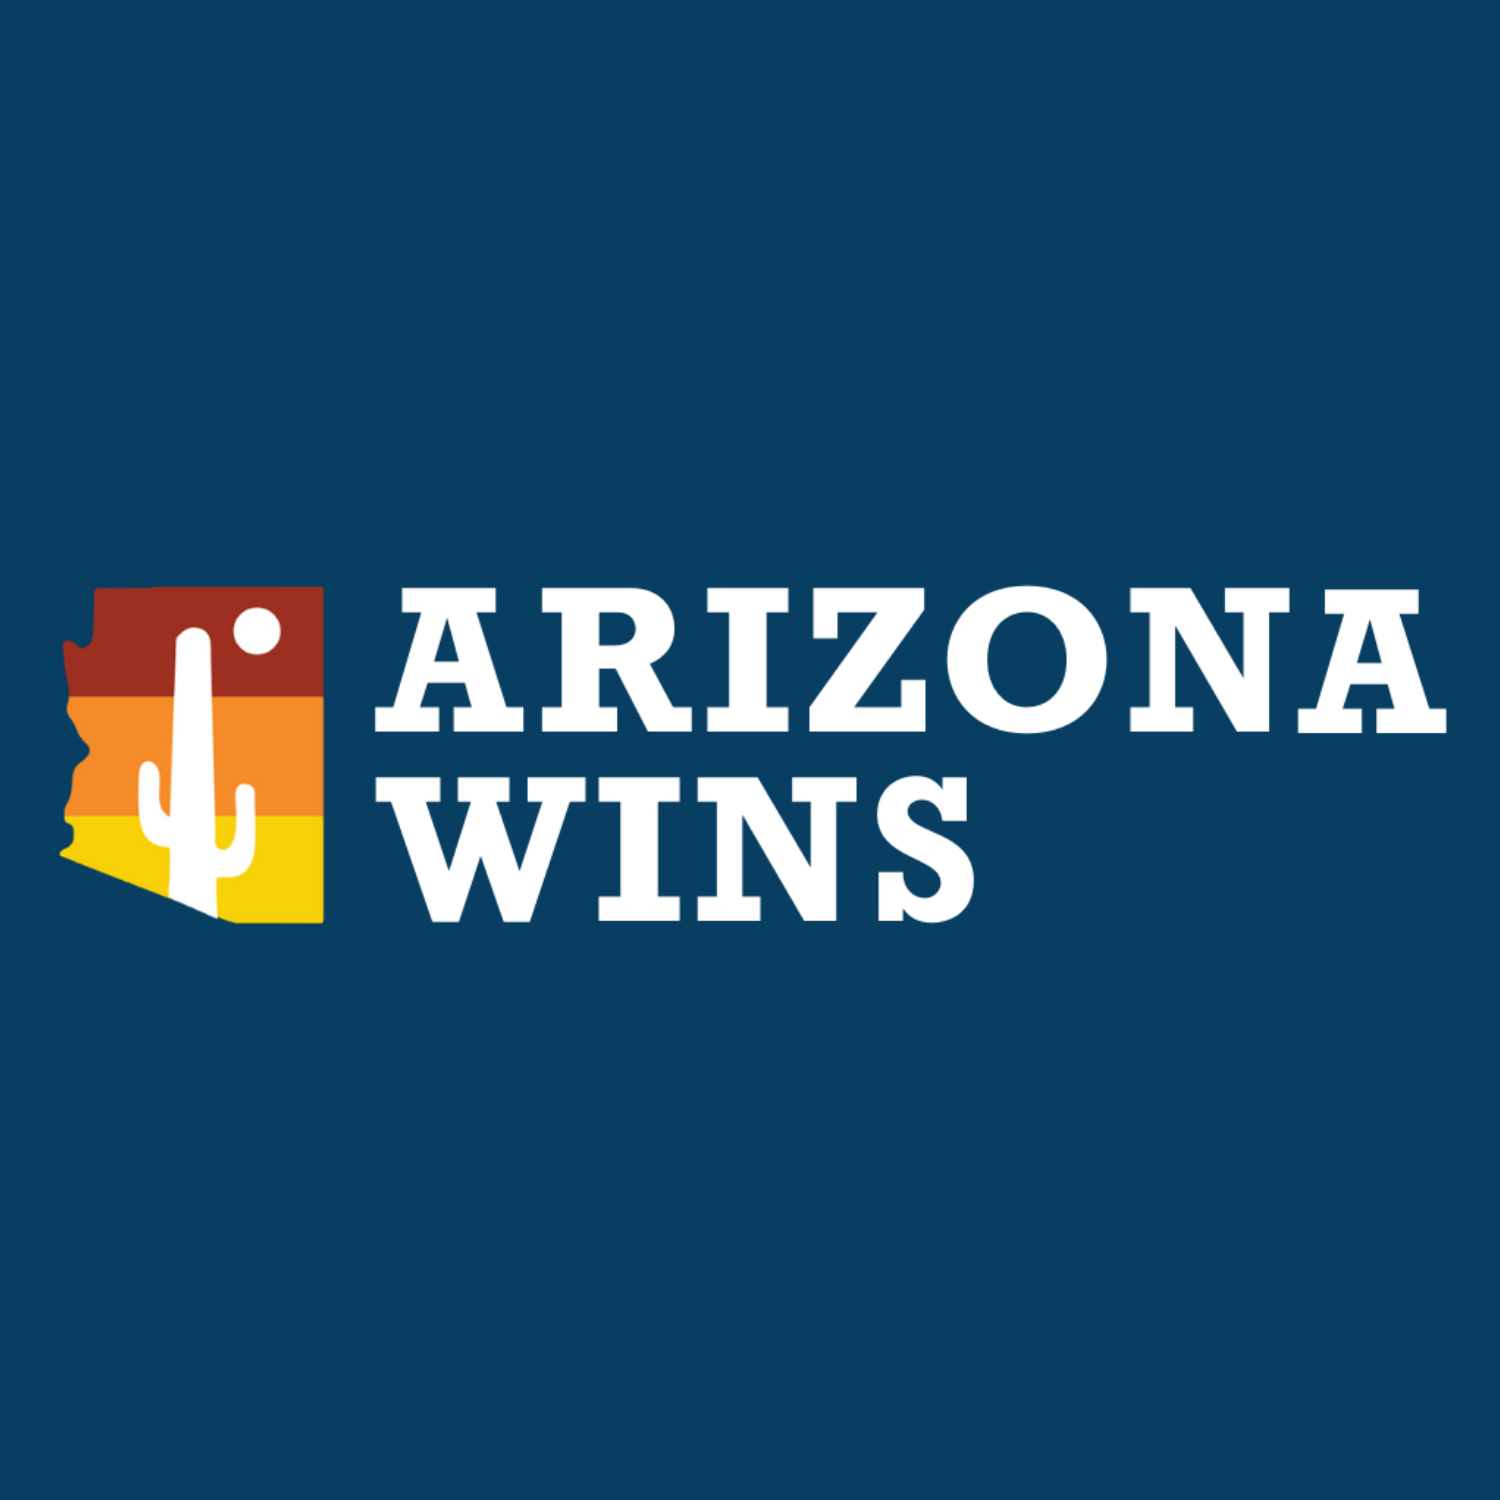  Arizona Wins is a coalition of progressive advocacy organizations and labor unions, working together to improve public policy for working families in Arizona. Our mission is to change the face of the Arizona legislature and achieve progressive polic